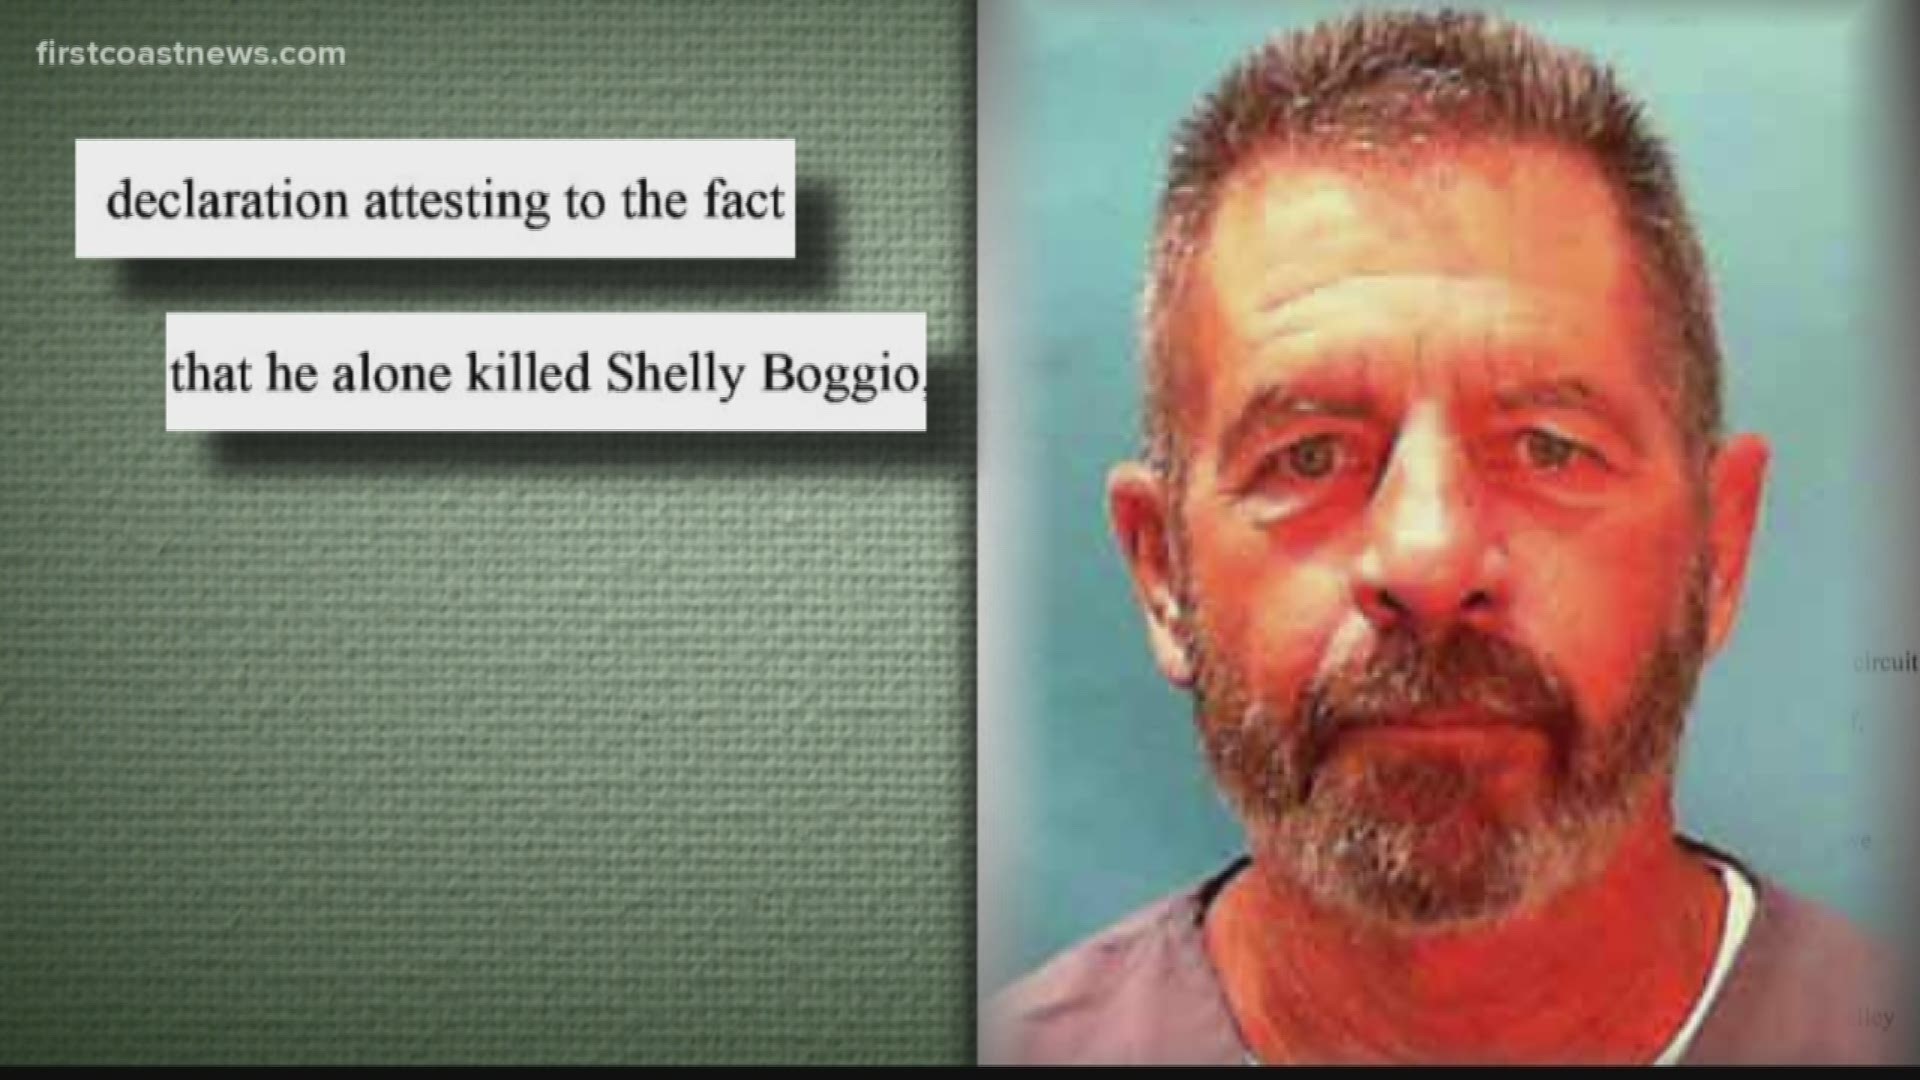 Over time, Pearcy had admitted to the crime. Most recently, he signed an affidavit confessing that he acted alone when he killed Boggio and said Dailey wasn't there.